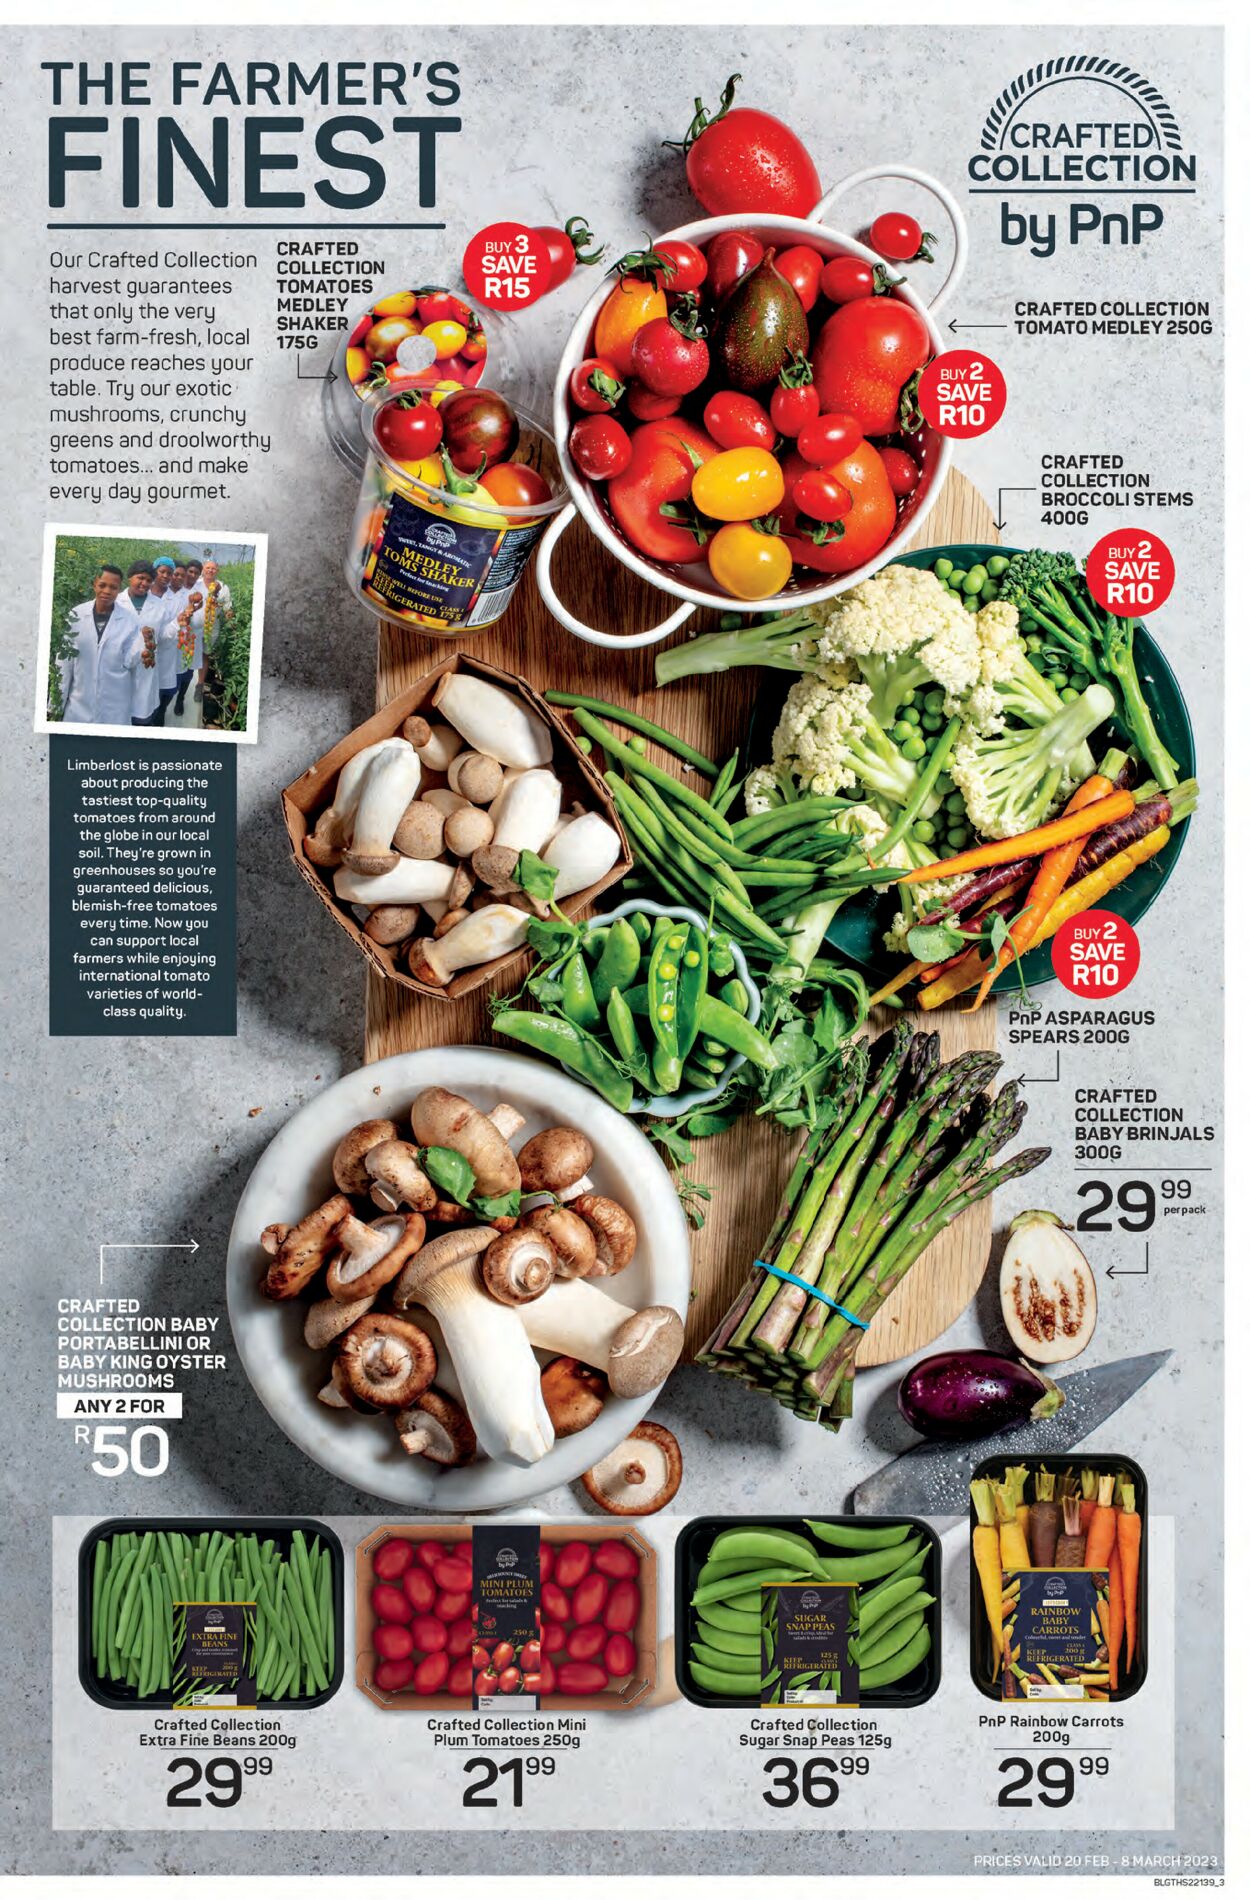 Pick n Pay Catalogue - 2023/02/20-2023/03/08 (Page 3)